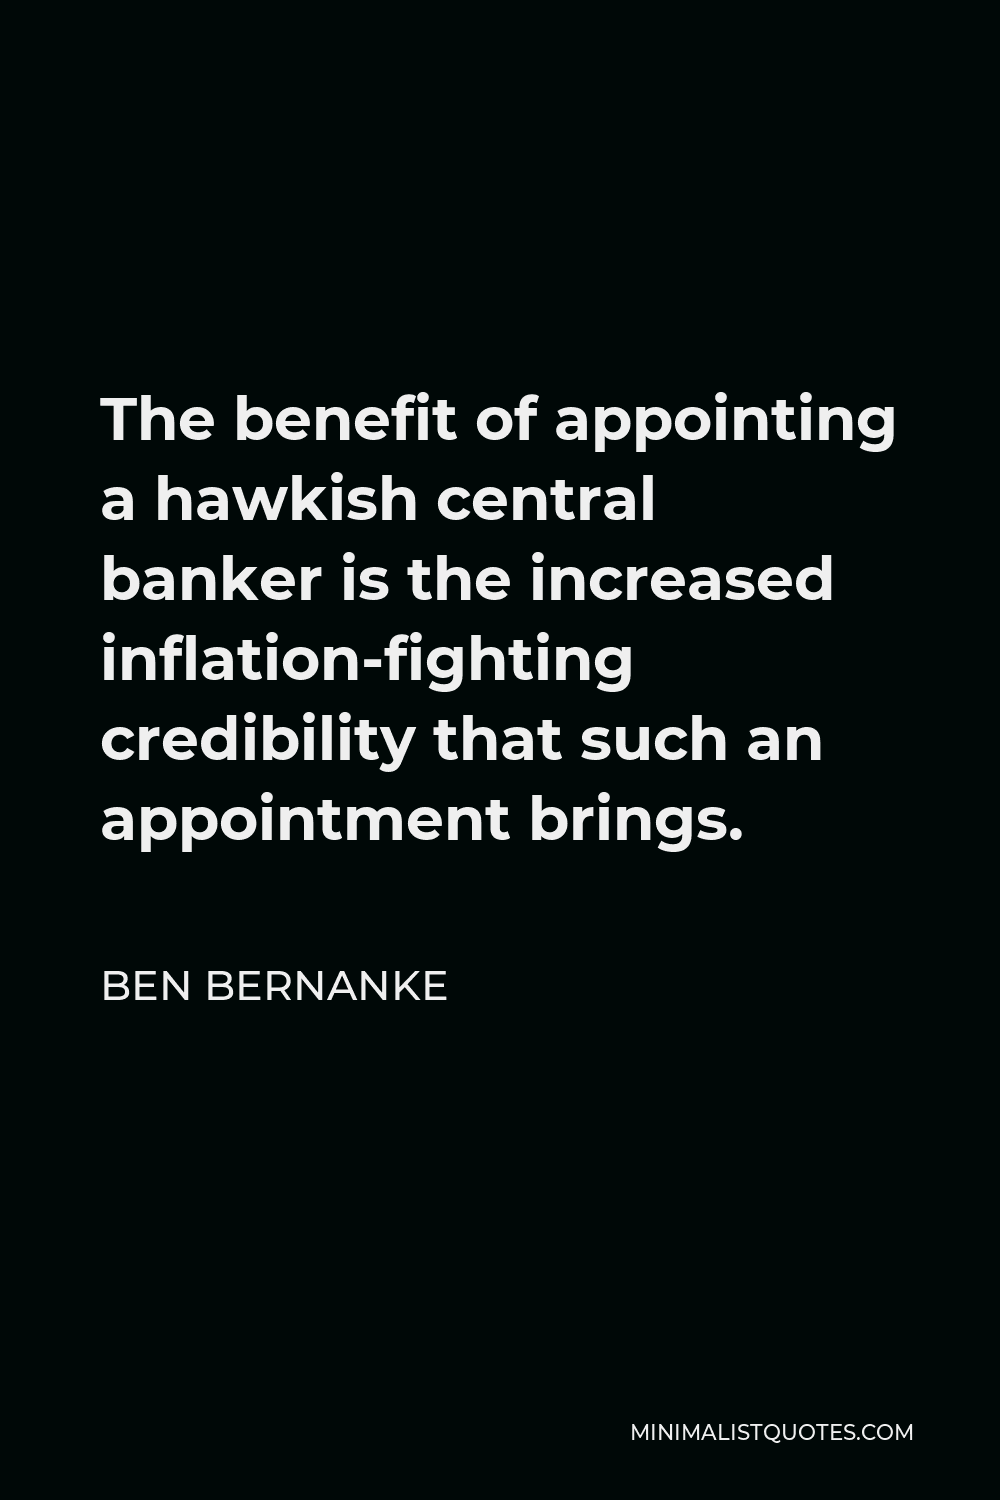 Ben Bernanke Quote - The benefit of appointing a hawkish central banker is the increased inflation-fighting credibility that such an appointment brings.